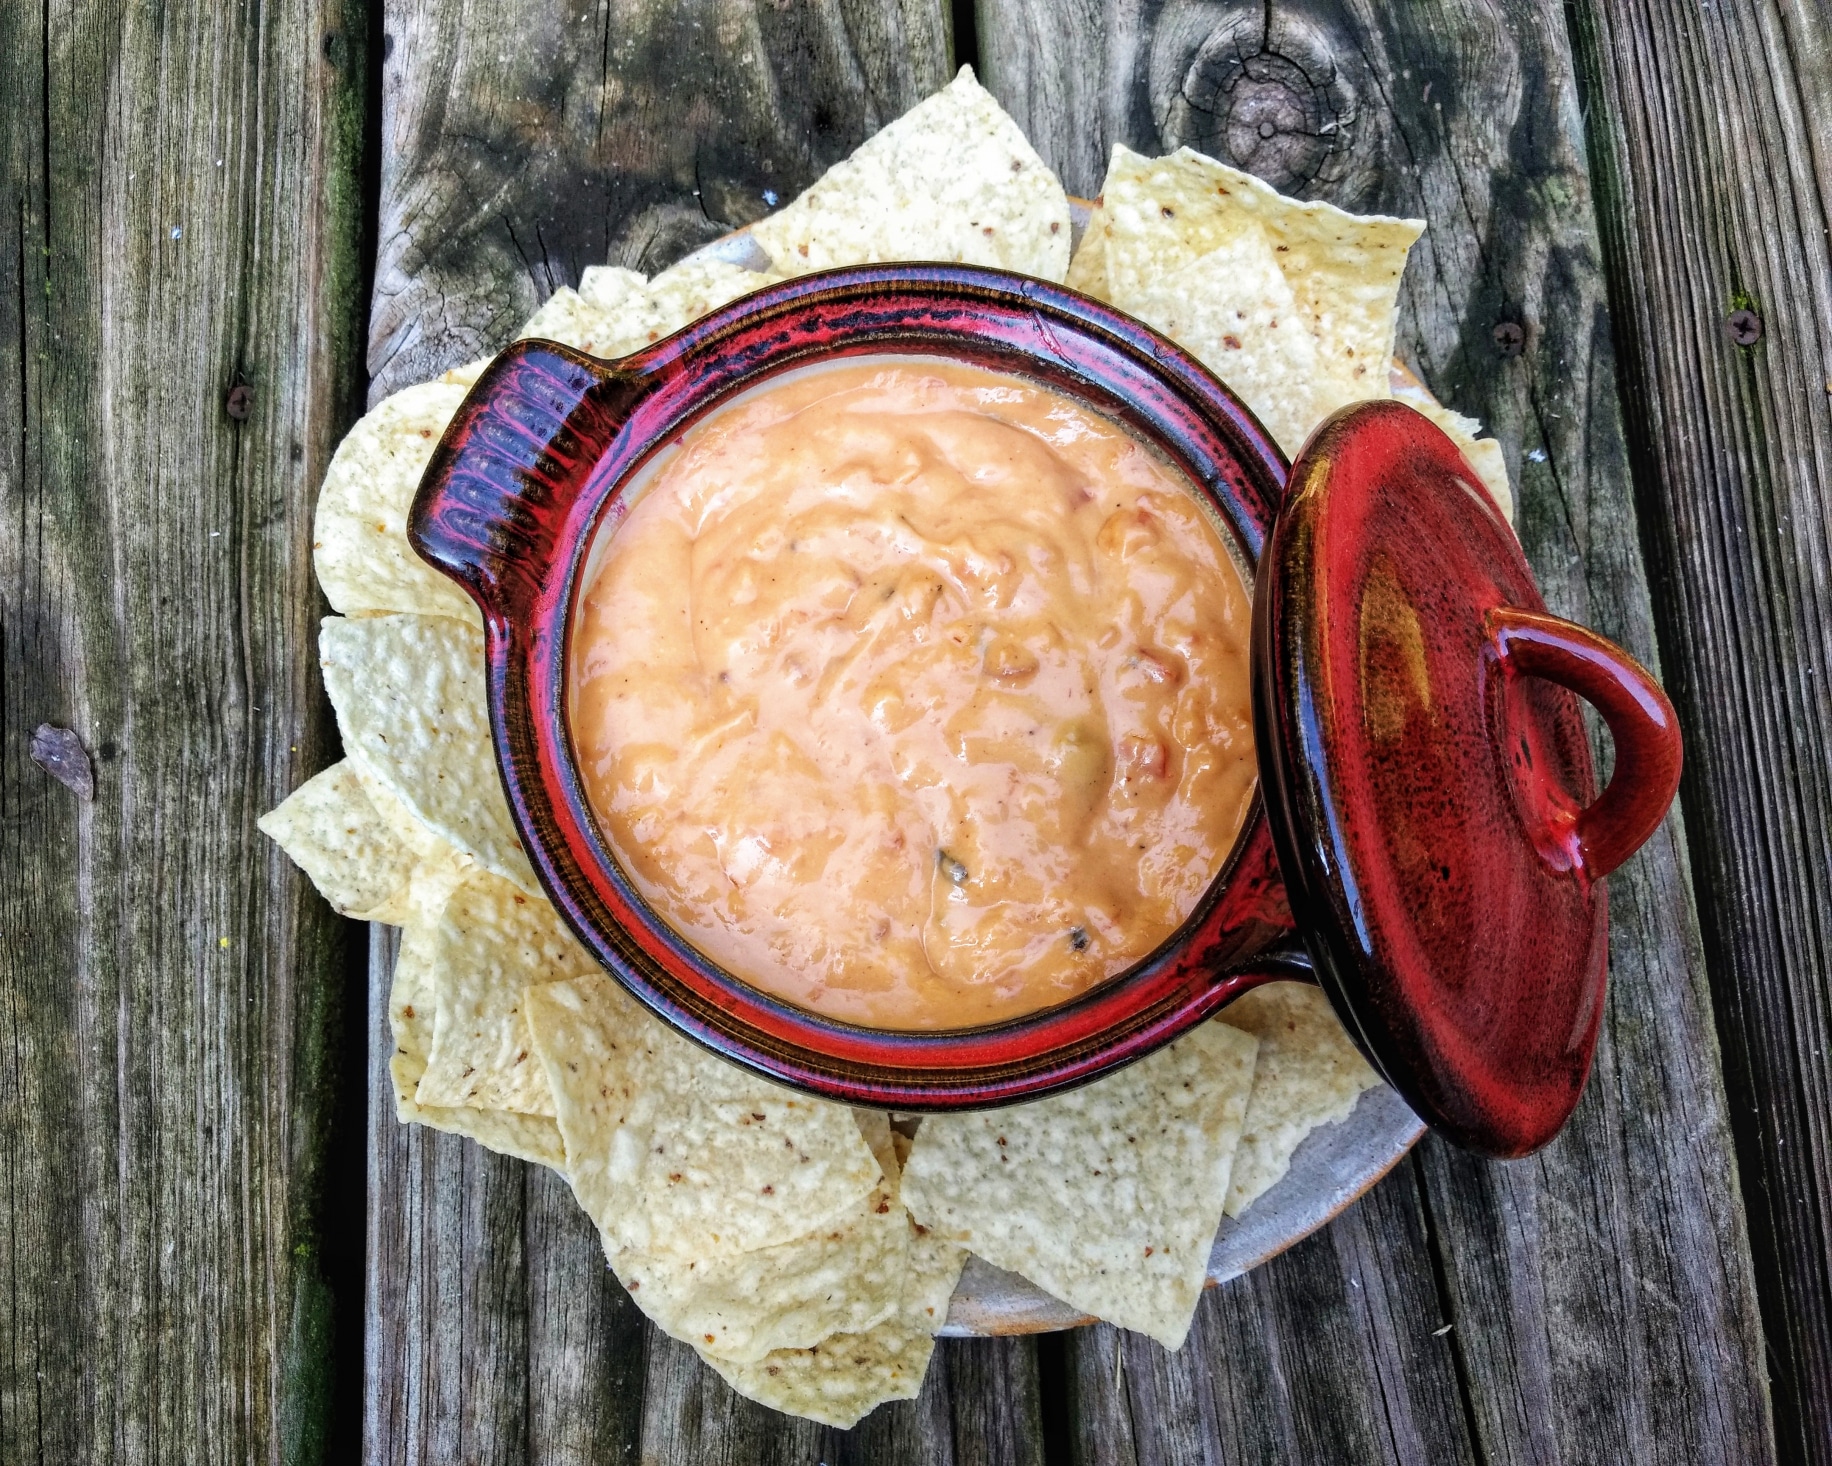 IMG 20181006 090139881 011 Try this easy Rotel cheese dip recipe that uses Two Mamas Salsa from the Piggly Wiggly on Clairmont Avenue in Birmingham